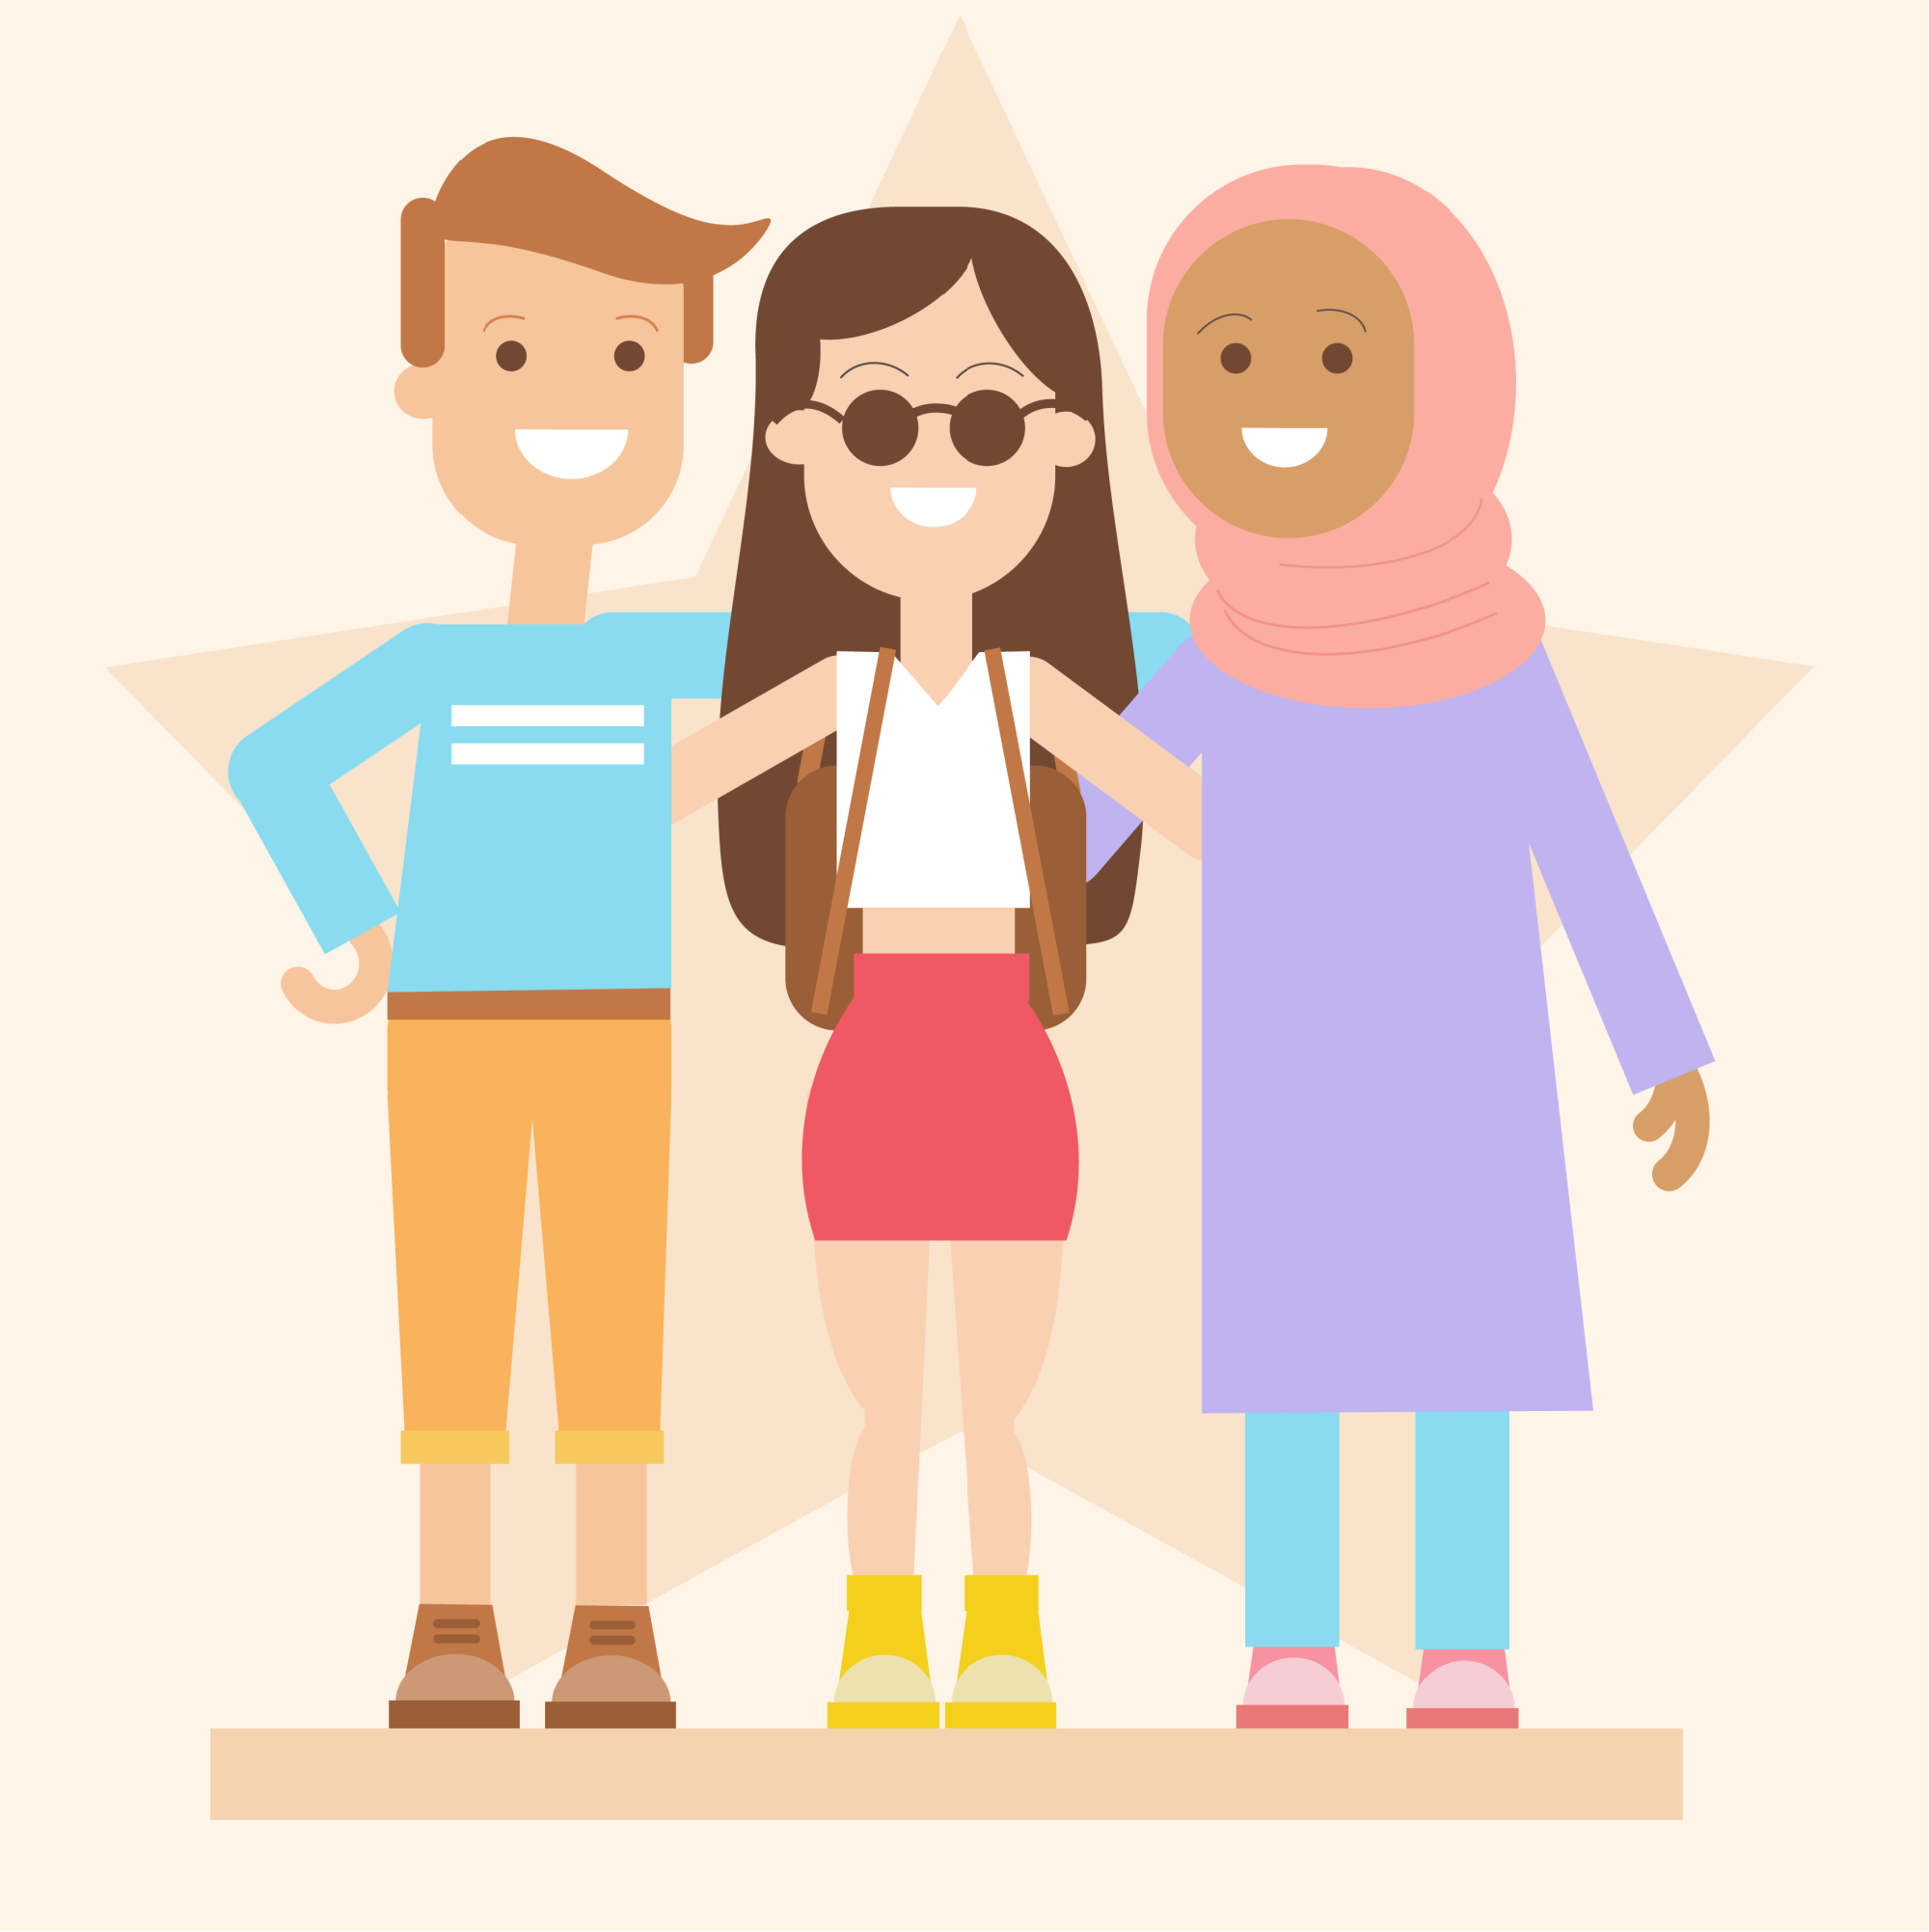 3 international pals: white male, asian girl with a backpack, muslim girl